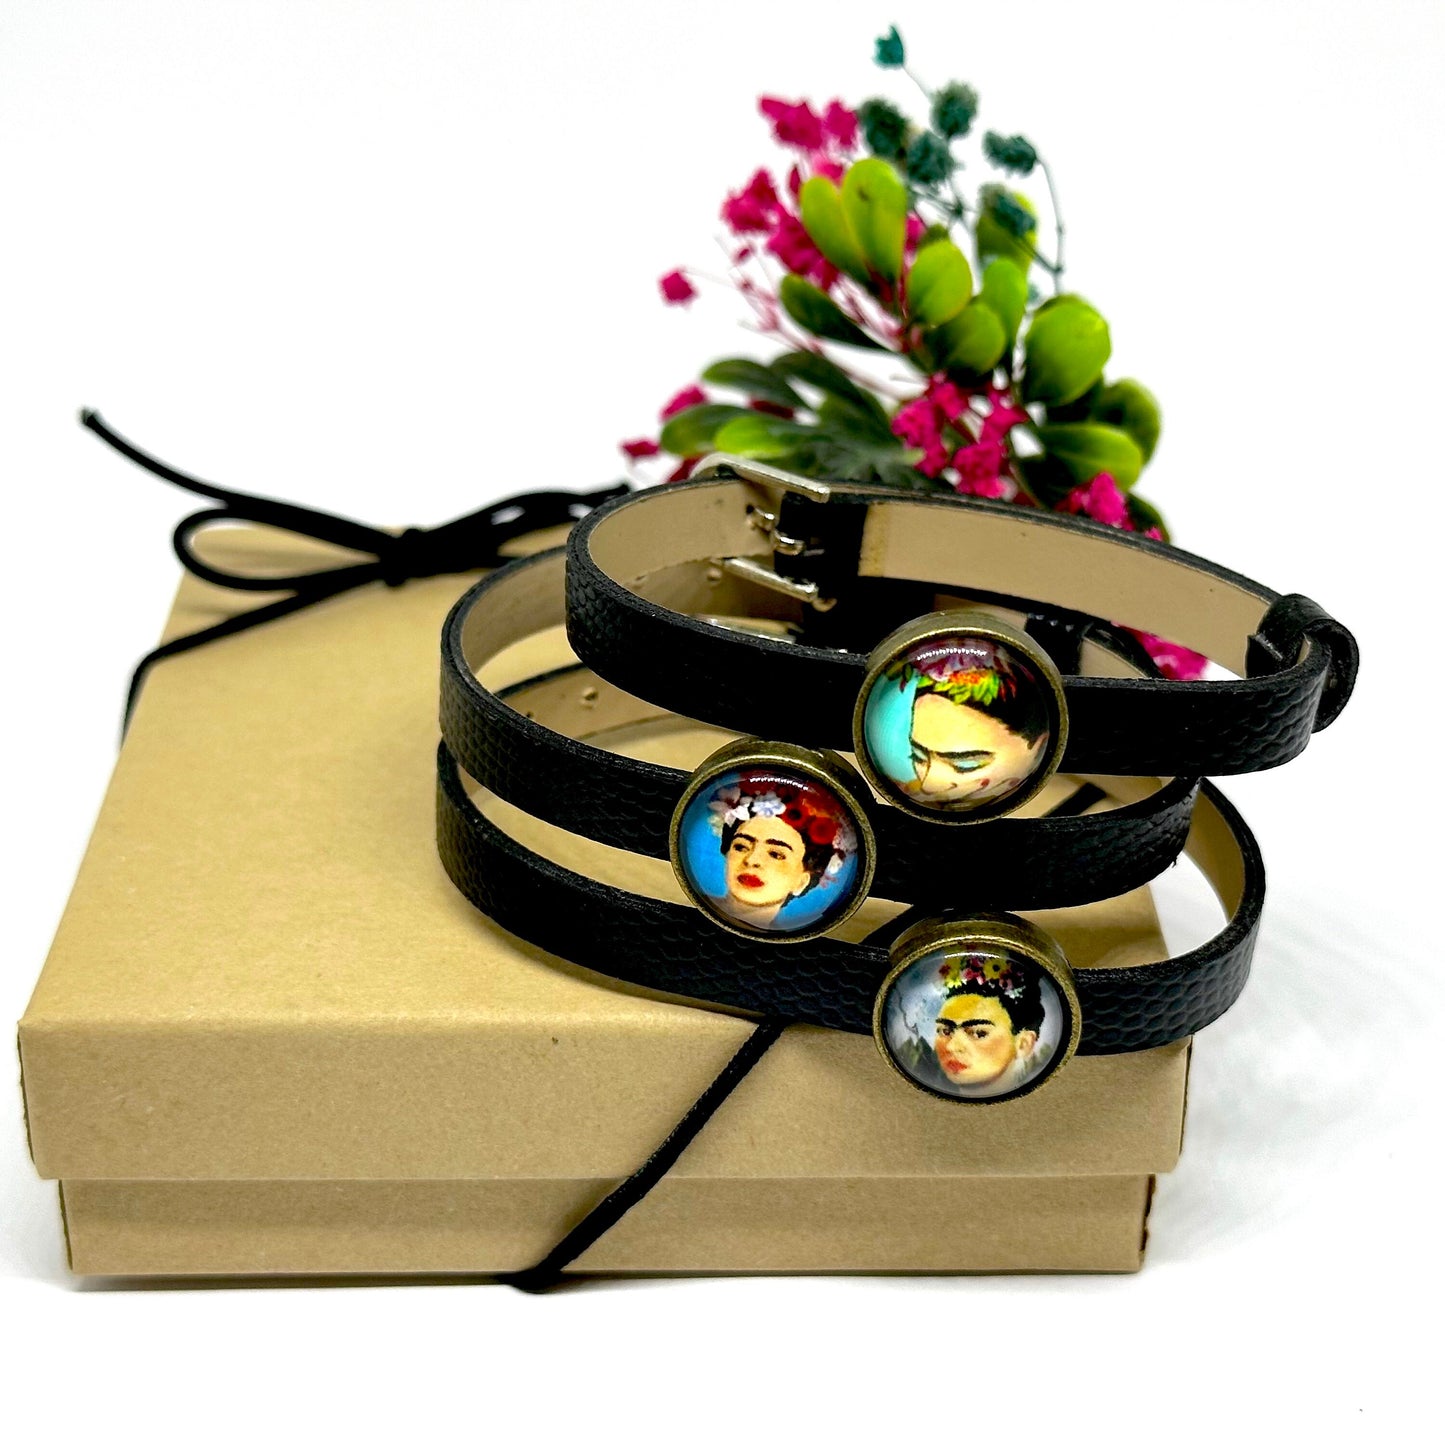 Lovely Frida Inspired Charm Bracelet Set for Girls Casual Fashion Summer Fun Spring Cute Birthday Gift Idea Black Leather Adjustable Straps